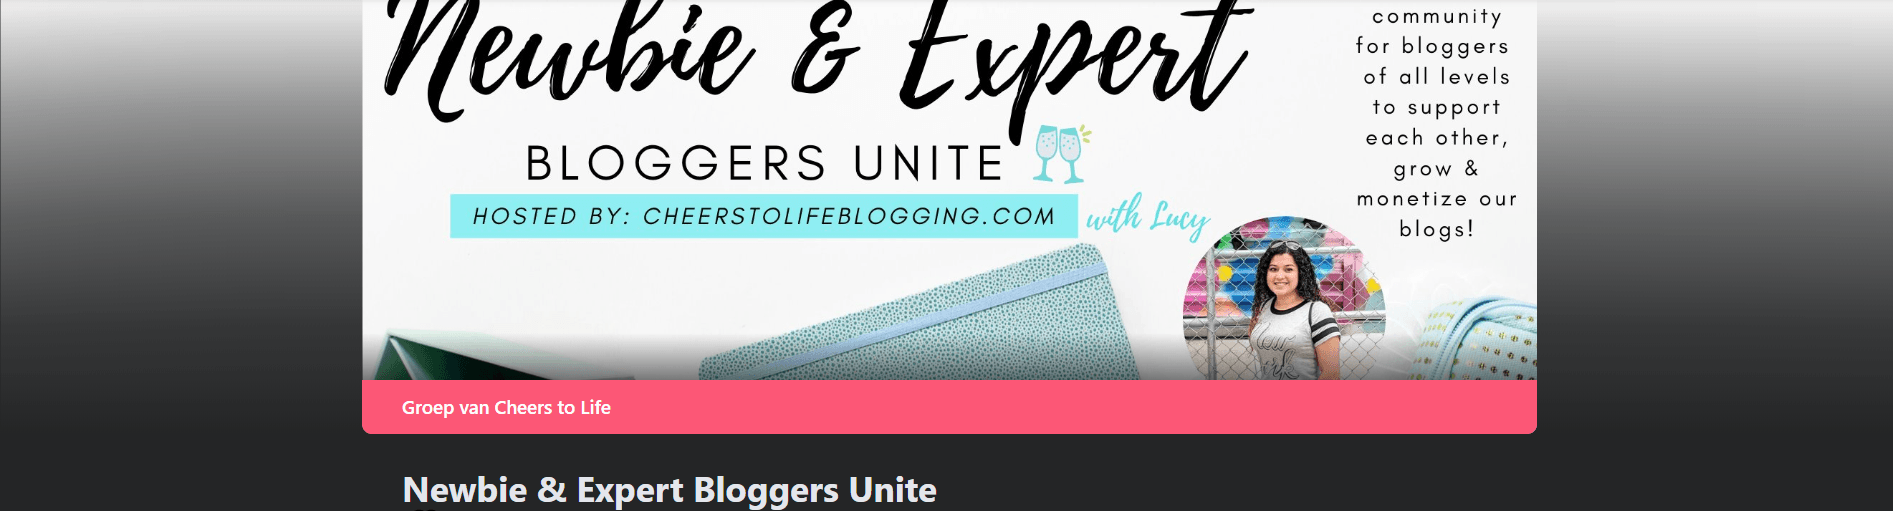 Newbie and Expert bloggers unite facebook group